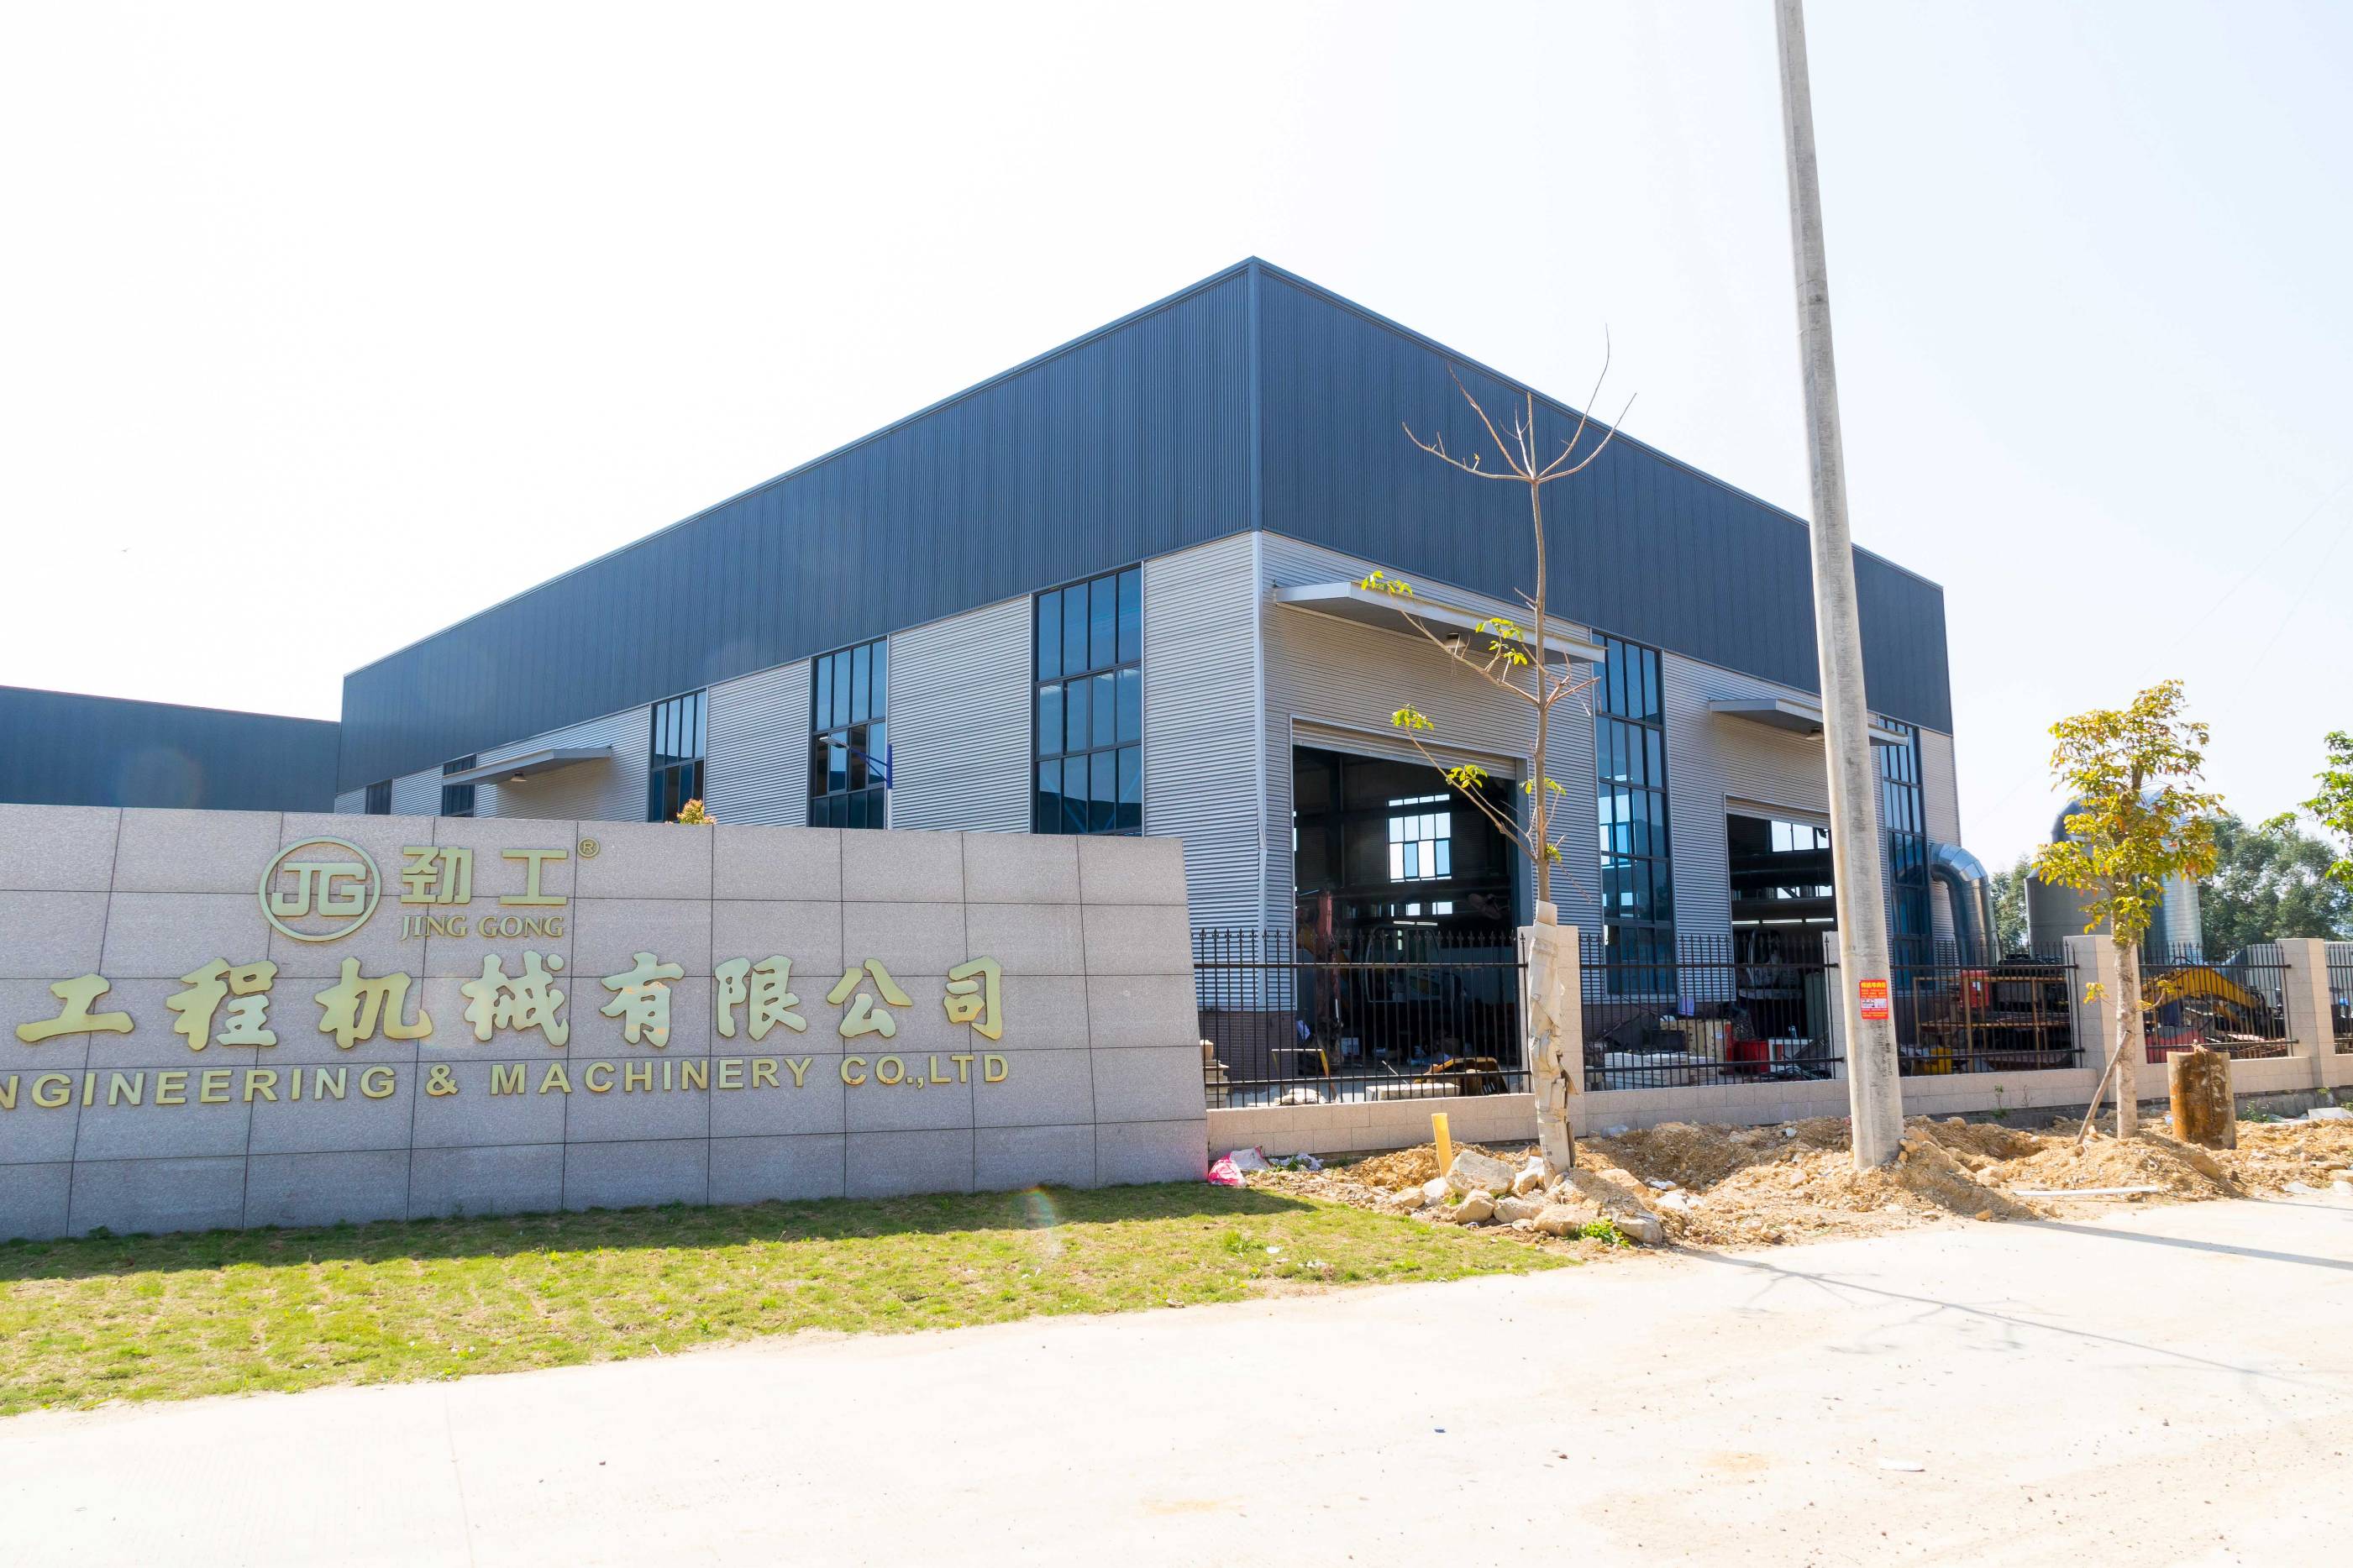 The first place among the best-selling excavators of Jinggong!